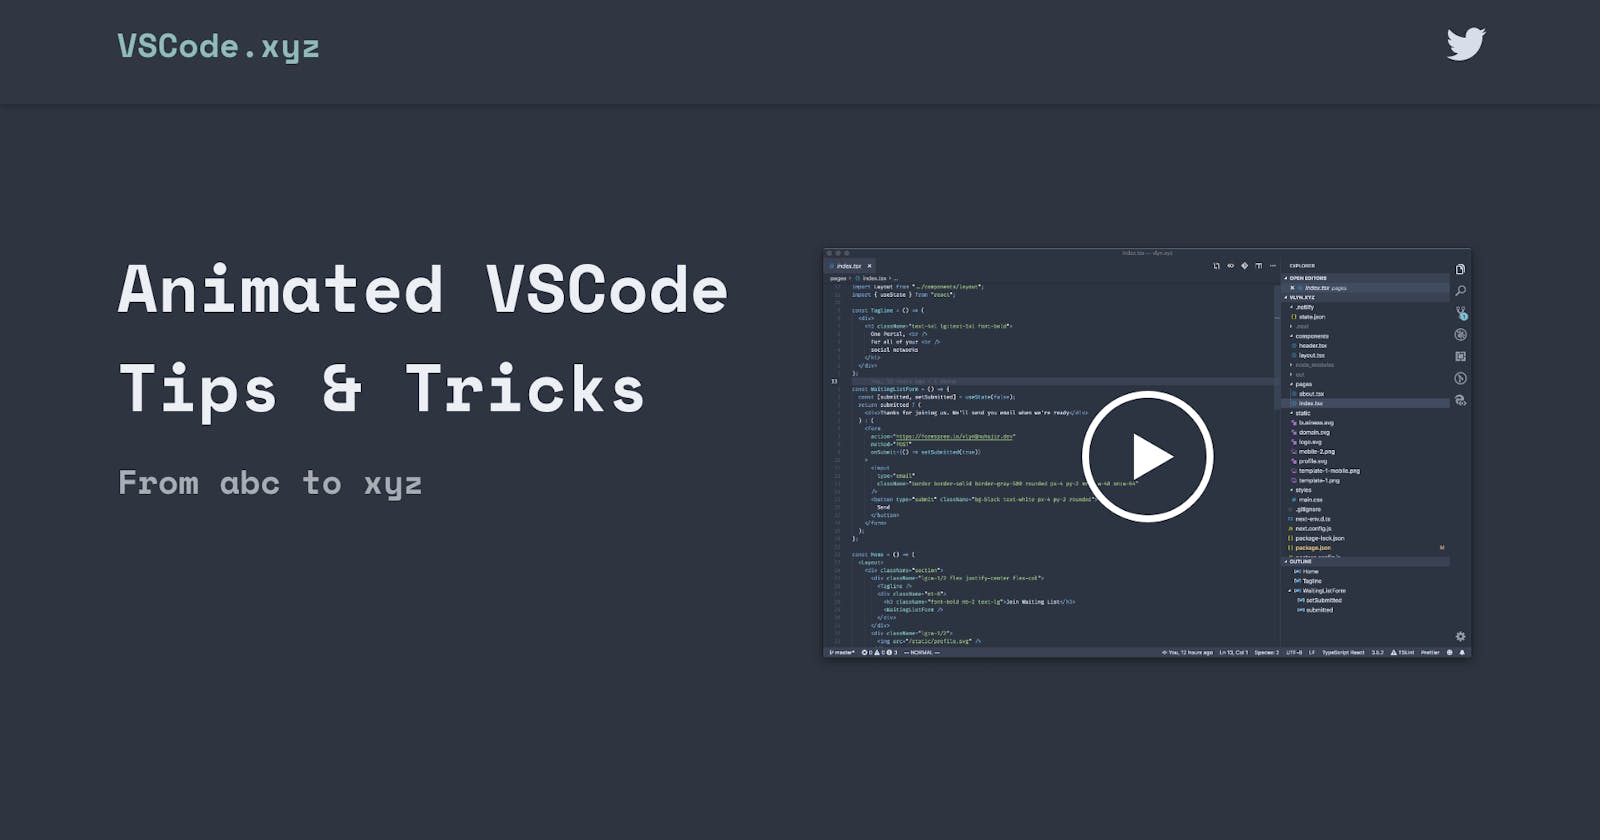 VSCode Tips & Tricks Collection in GIF